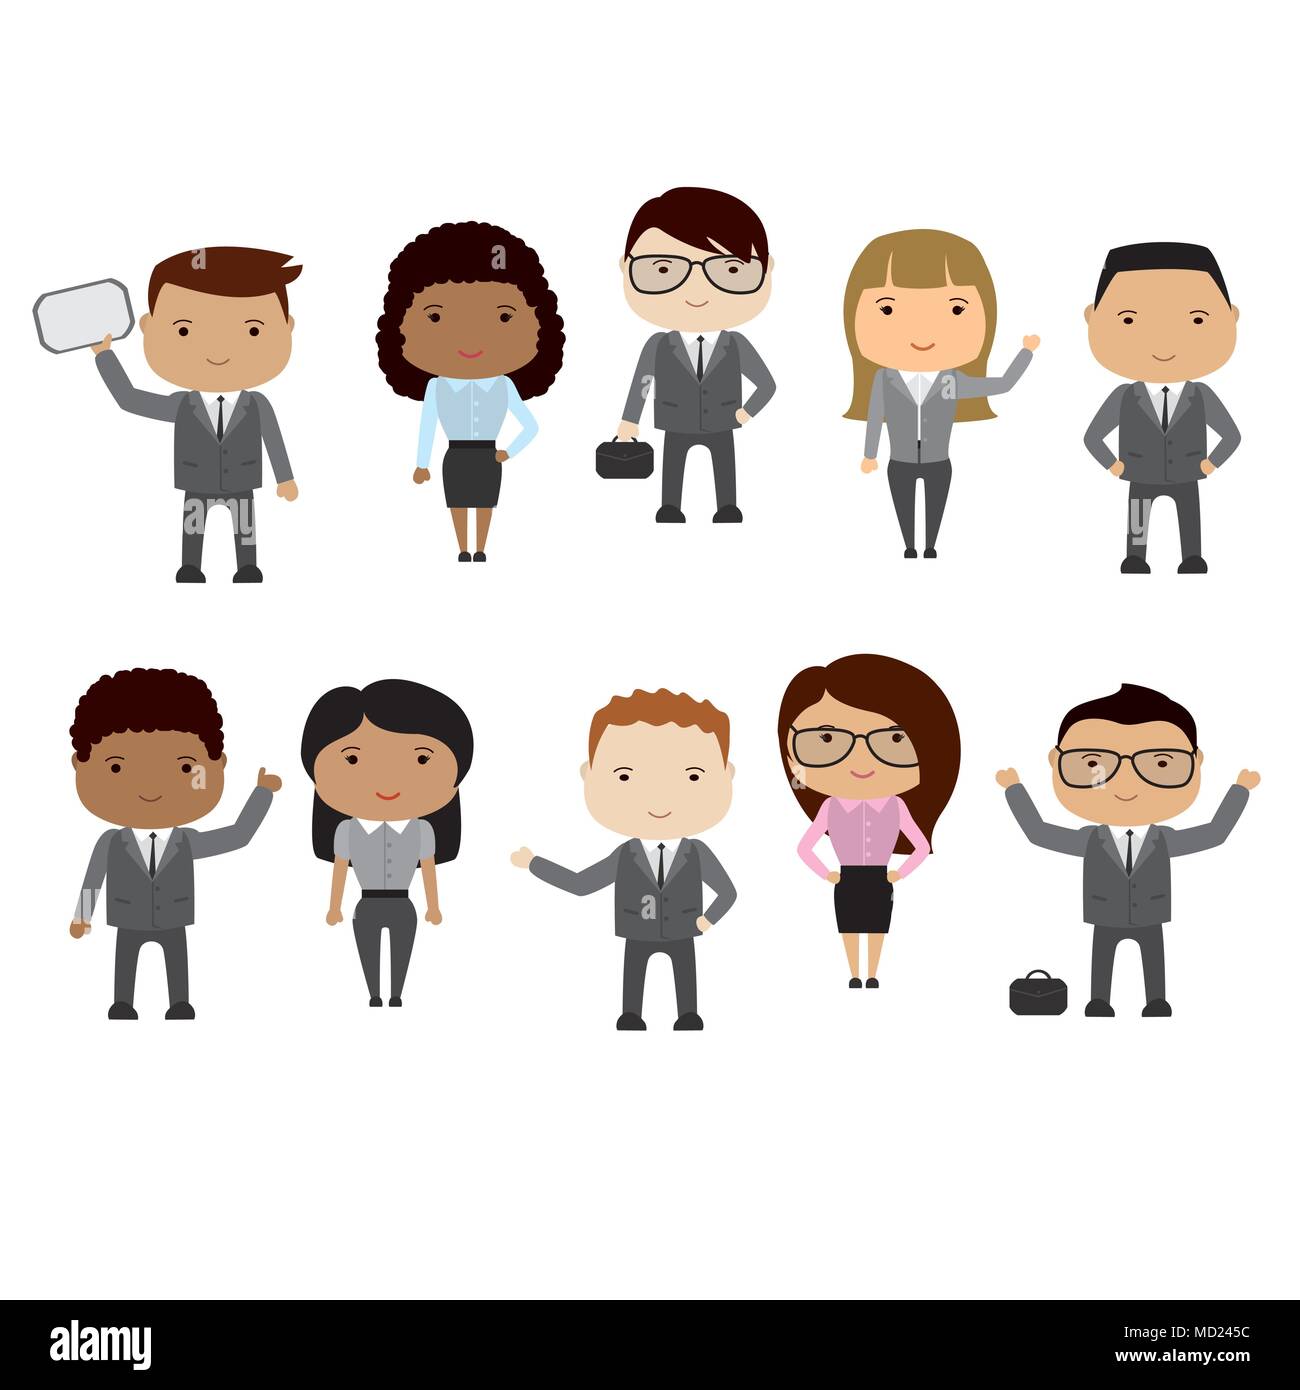 Set of cartoon  business woman and business man,different races,stock vector illustration Stock Vector